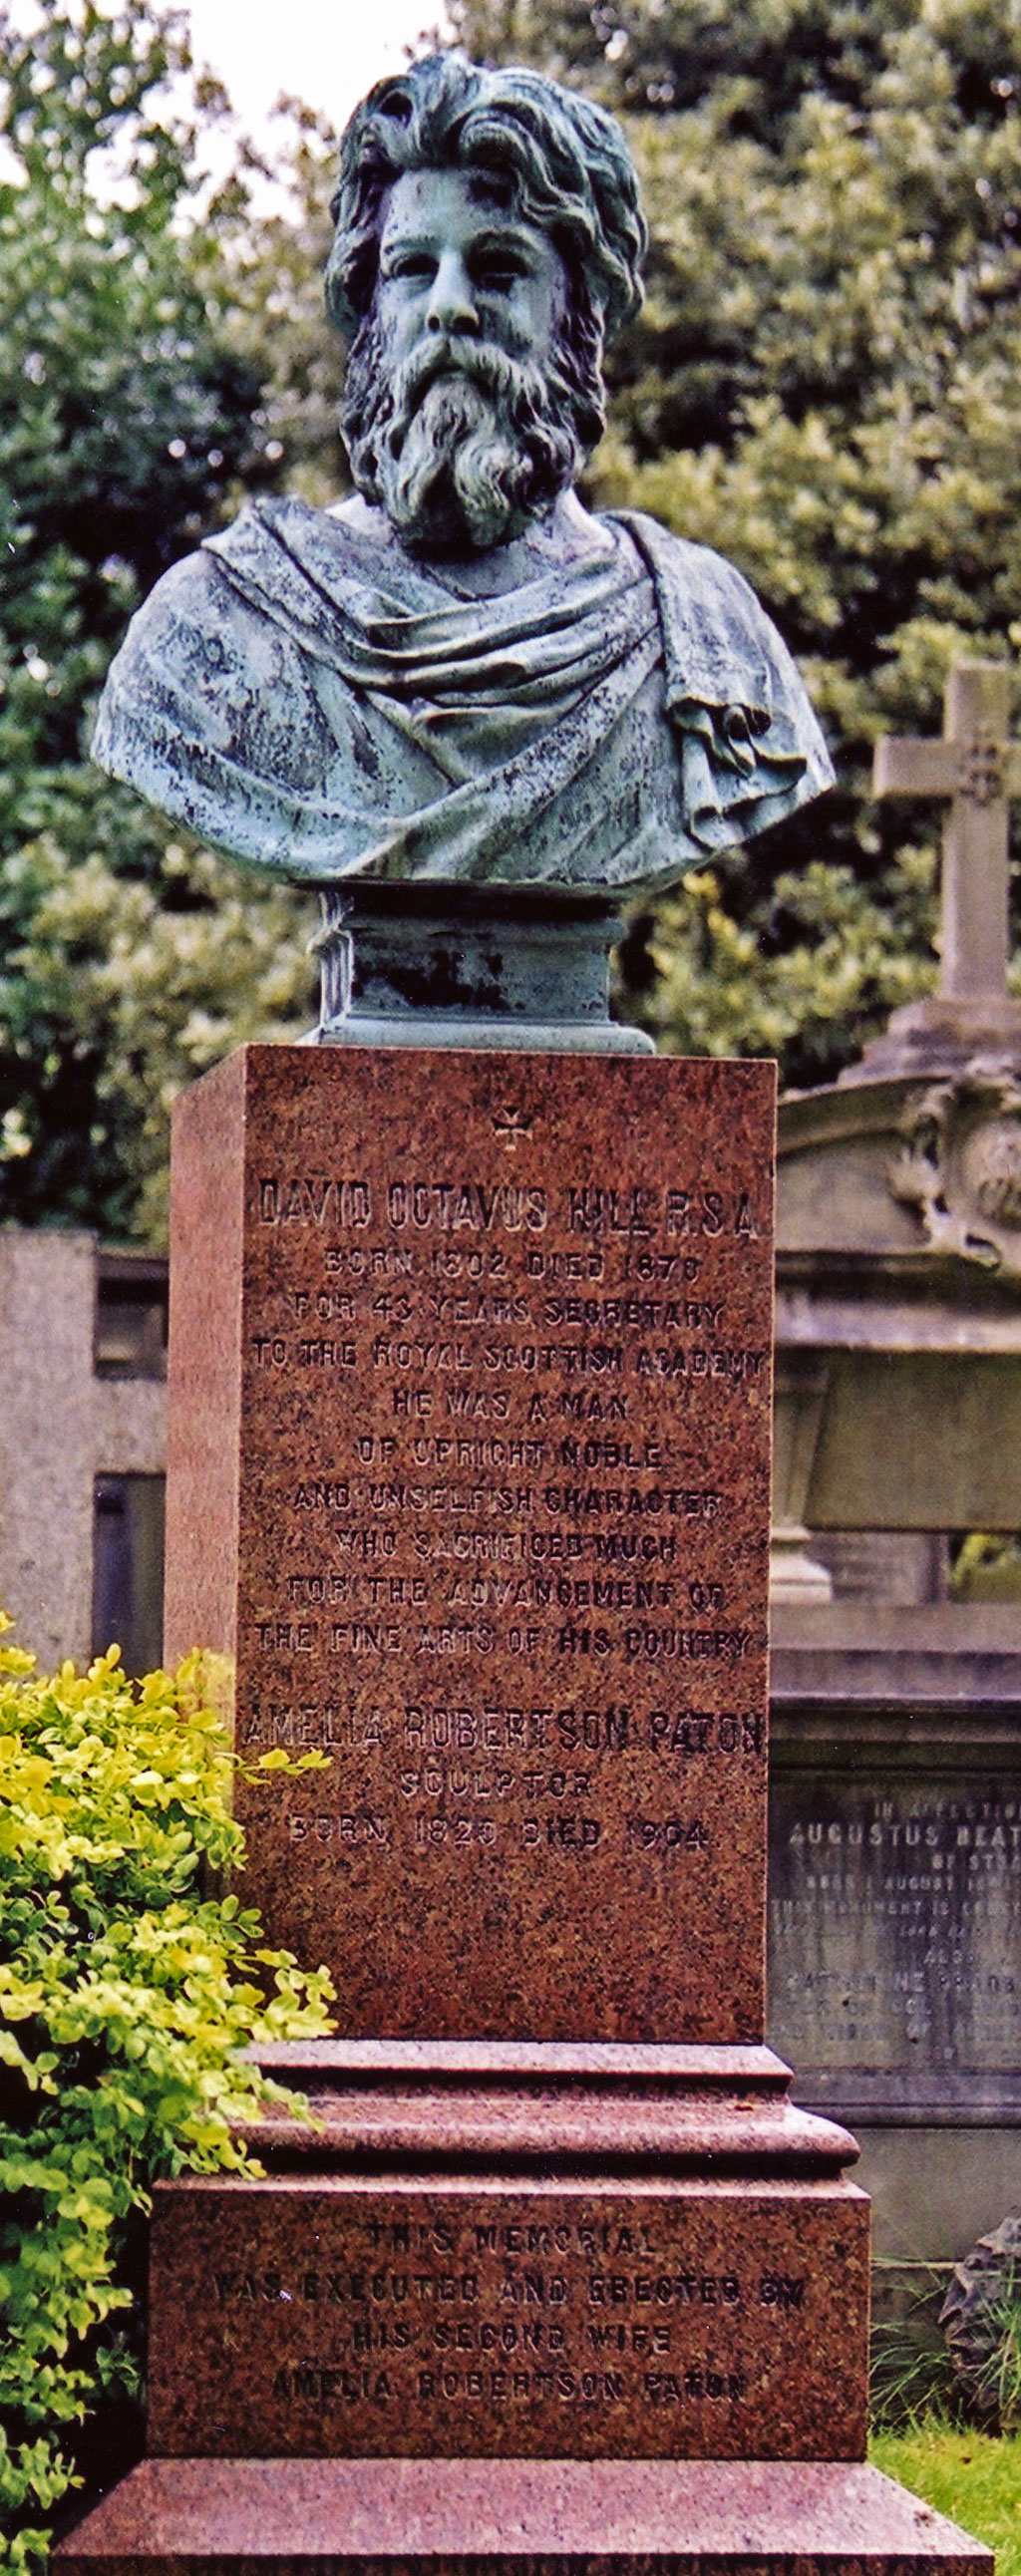 DO Hill's Grave on 20 May 2002, the bicentenary of his birth